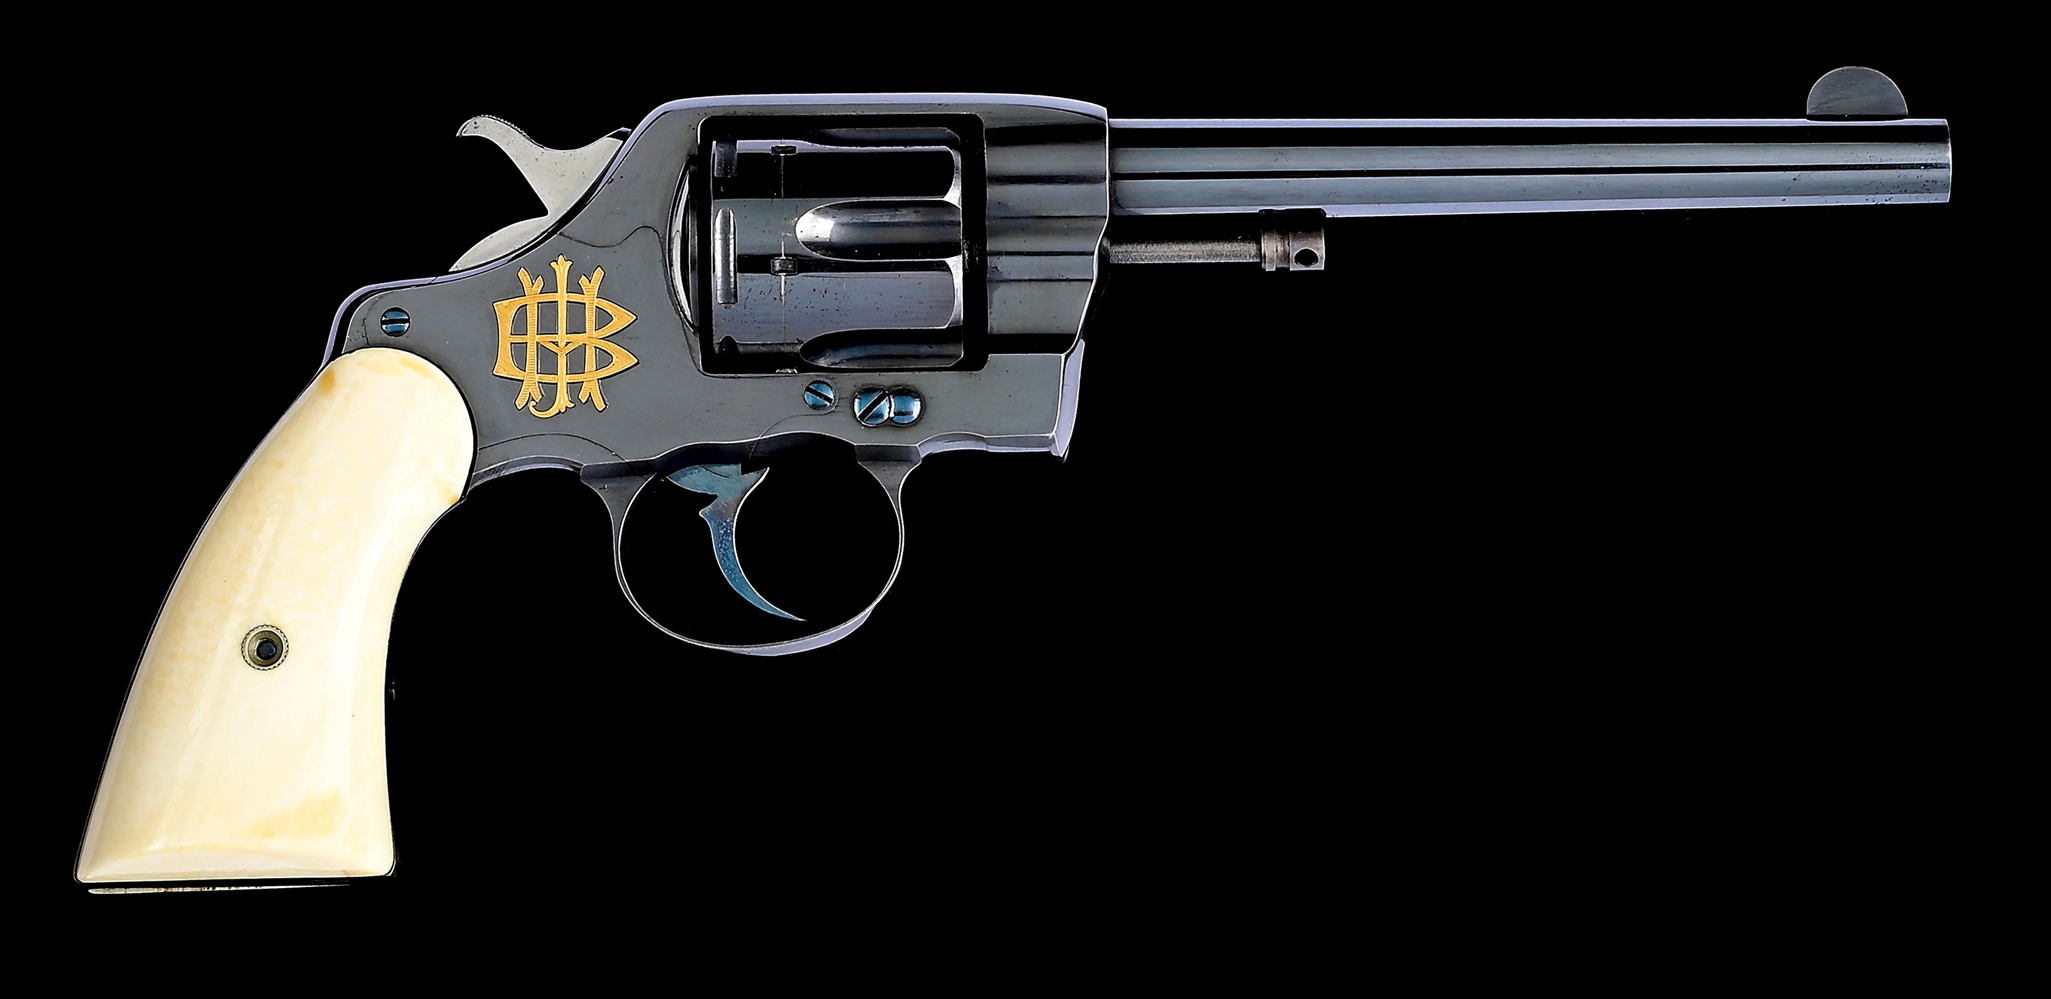 (A) ABSOLUTELY STUNNING COLT MODEL 1894 NEW ARMY DOUBLE ACTION REVOLVER WITH GOLD INLAID MONOGRAM TO JOHNNY BAKER (1895).